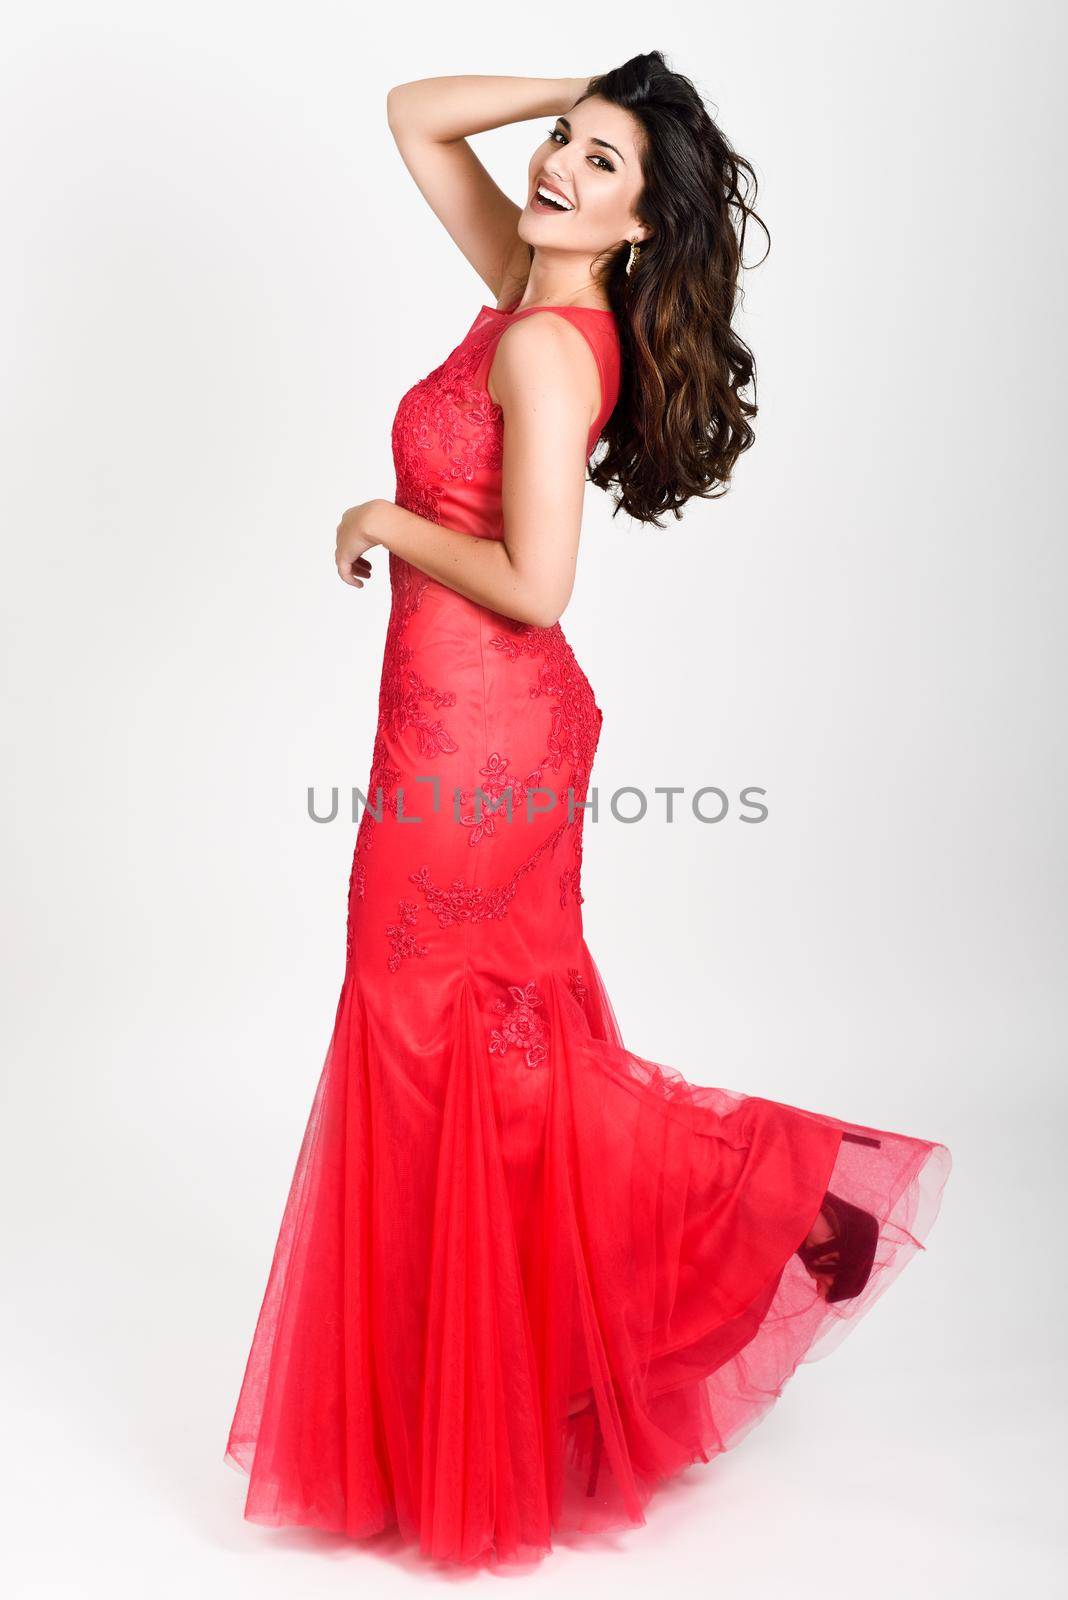 Young woman wearing long red dress on white background. by javiindy